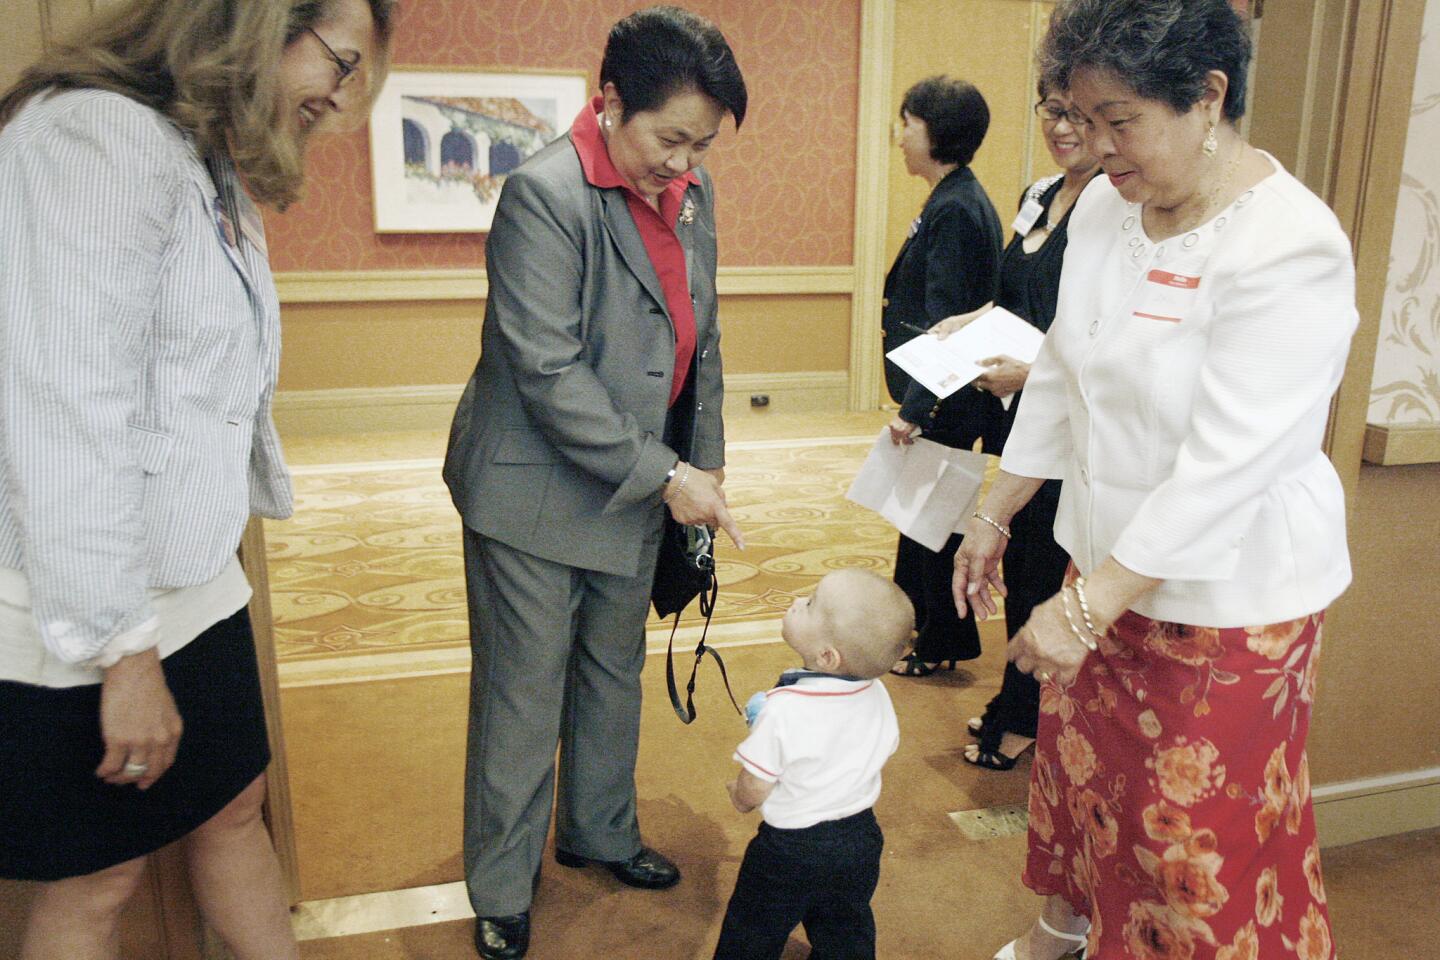 Former Glendale zoning administrator Edith Fuentes, center, says hello to her grand nephew, Eli Autten, 1, during her campaign kickoff for city council at Hilton in Glendale on Thursday, September 20, 2012.